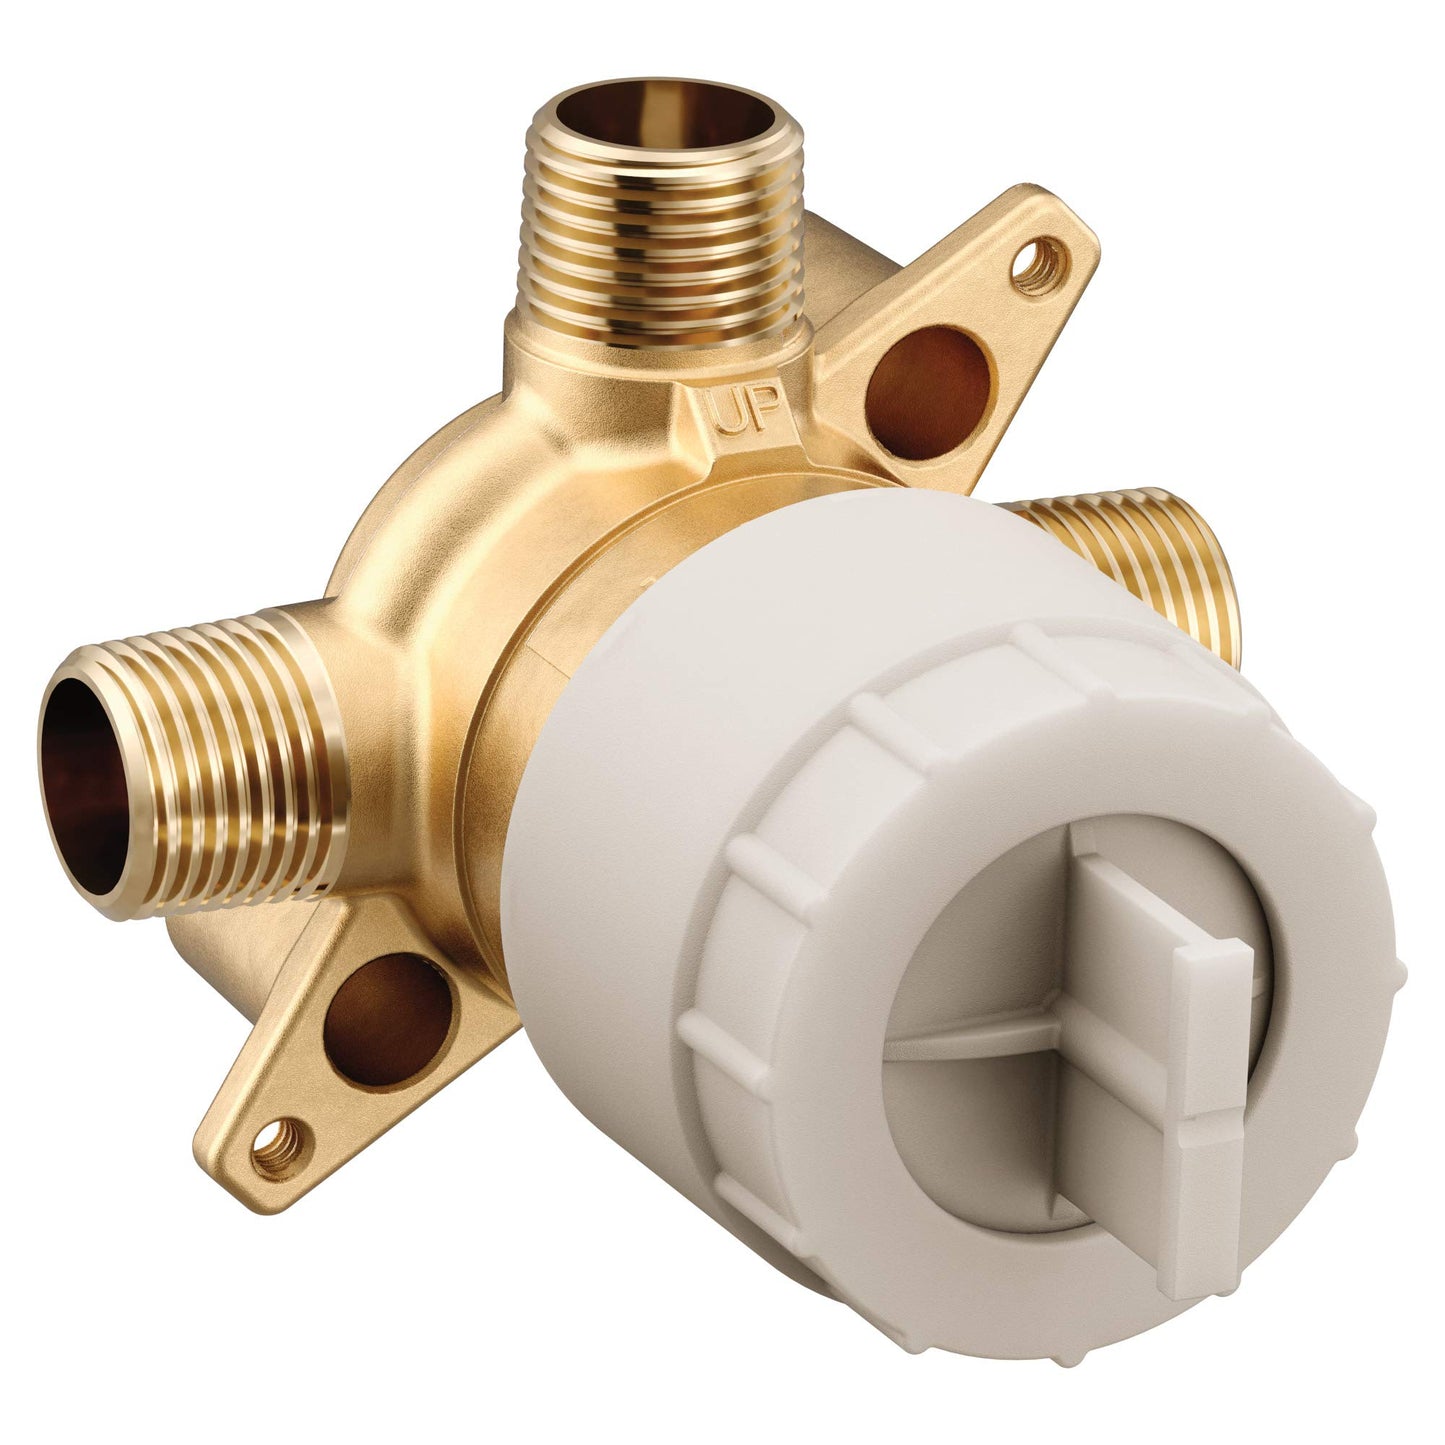 Moen U130CI M-CORE 3-Series 3 Port Shower Mixing Valve with CC/IPC Connections, or Unfinished - Like New